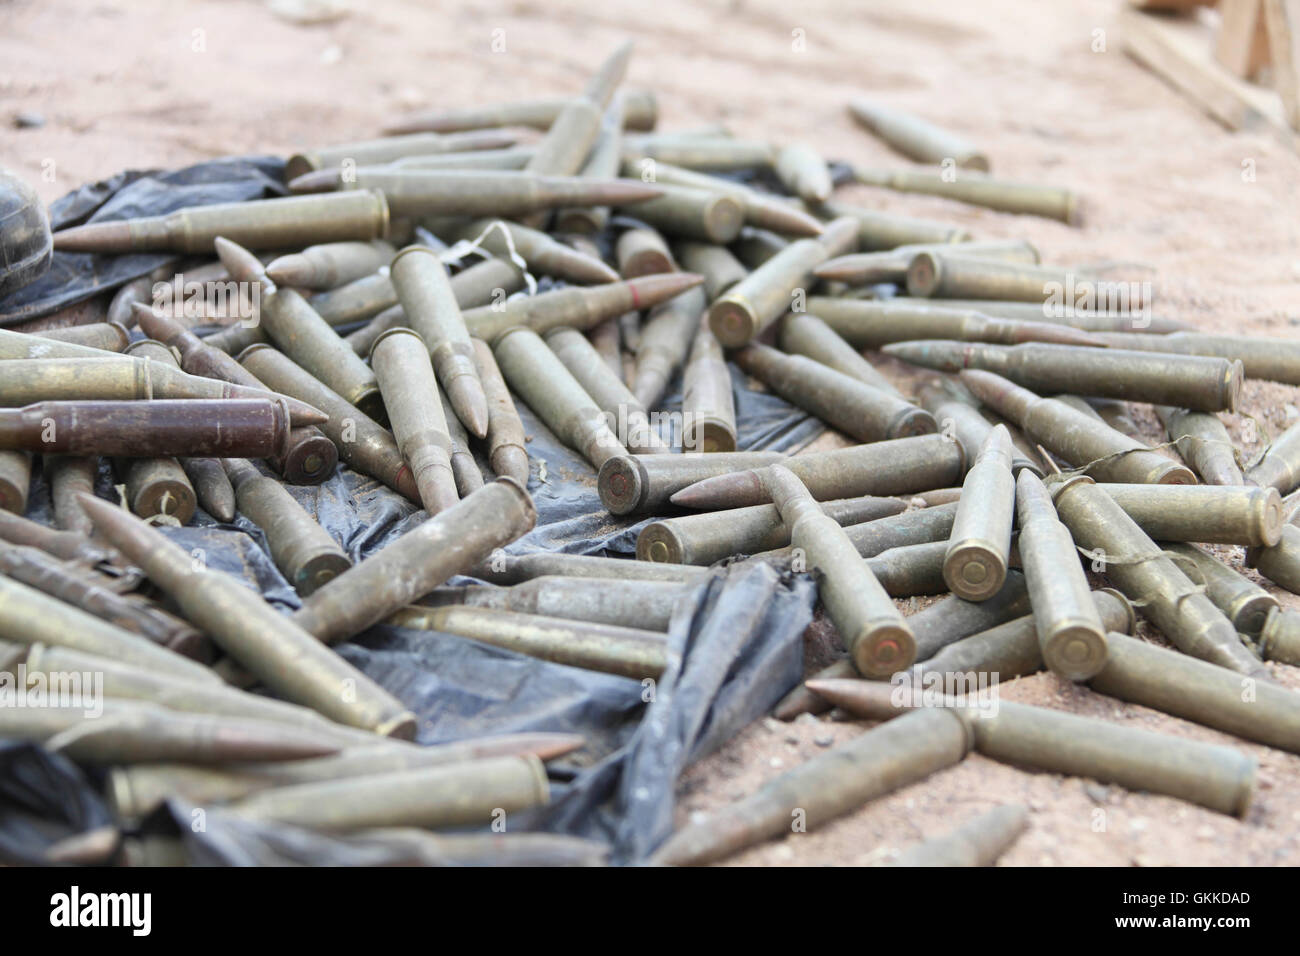 Bullets left behind by the al shabaabafter the town of Bula Burde was liberated by AMISOM forces on 16th March 2014. AU UN IST PHOTO / Ilyas A. Abukar Stock Photo